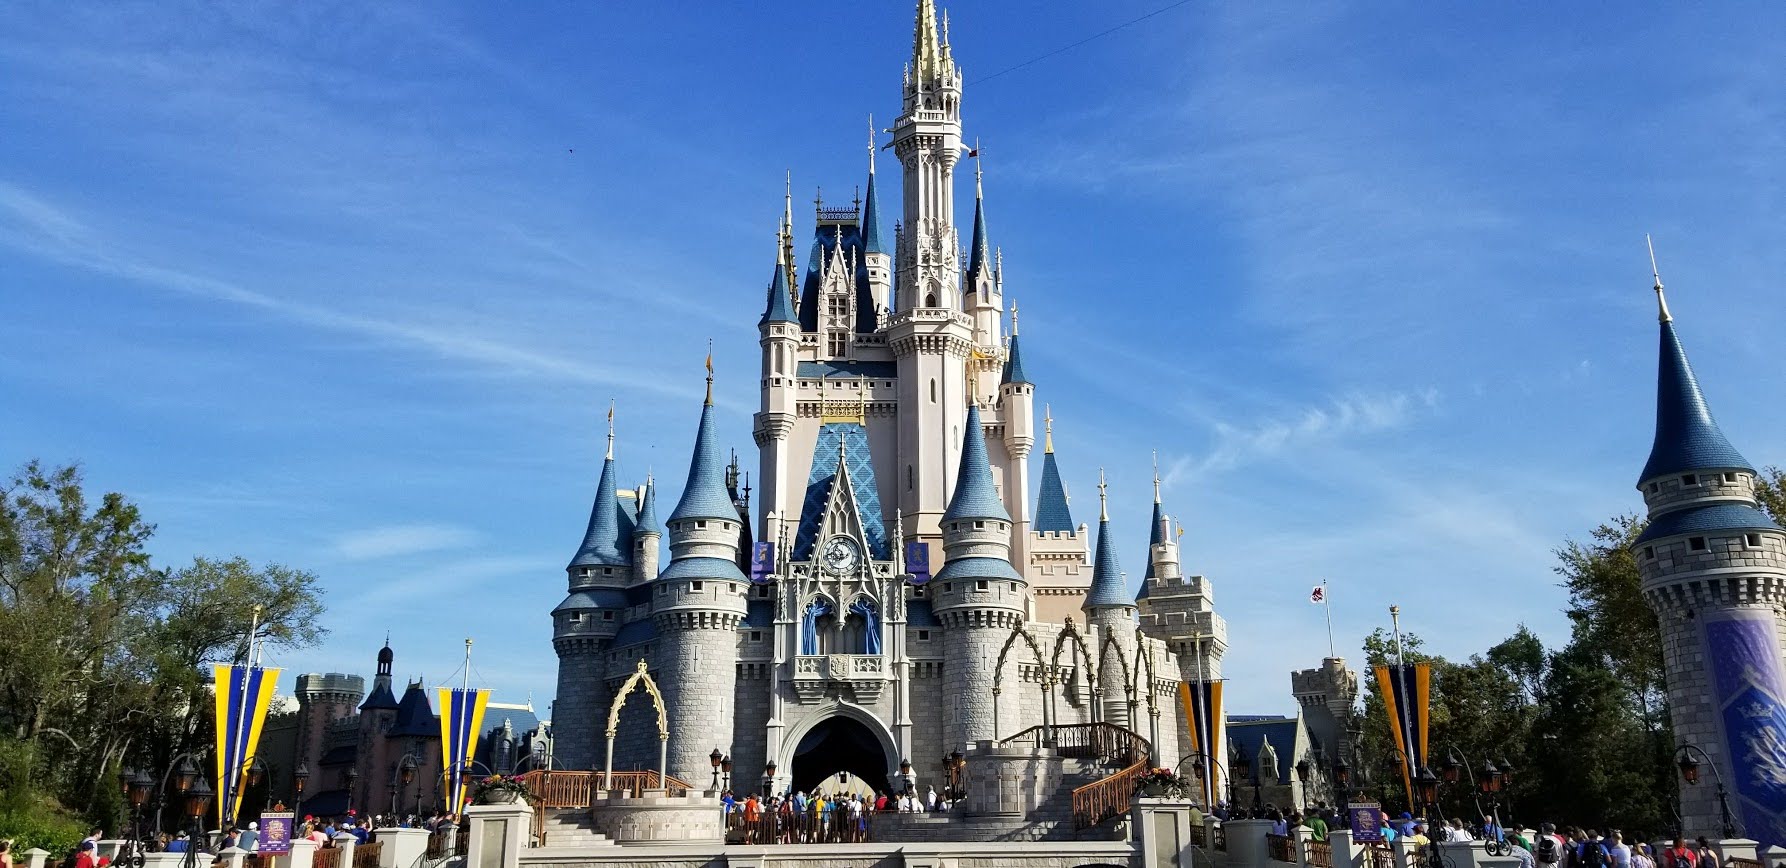 Disney World website showing Park Hours starting on May 10th